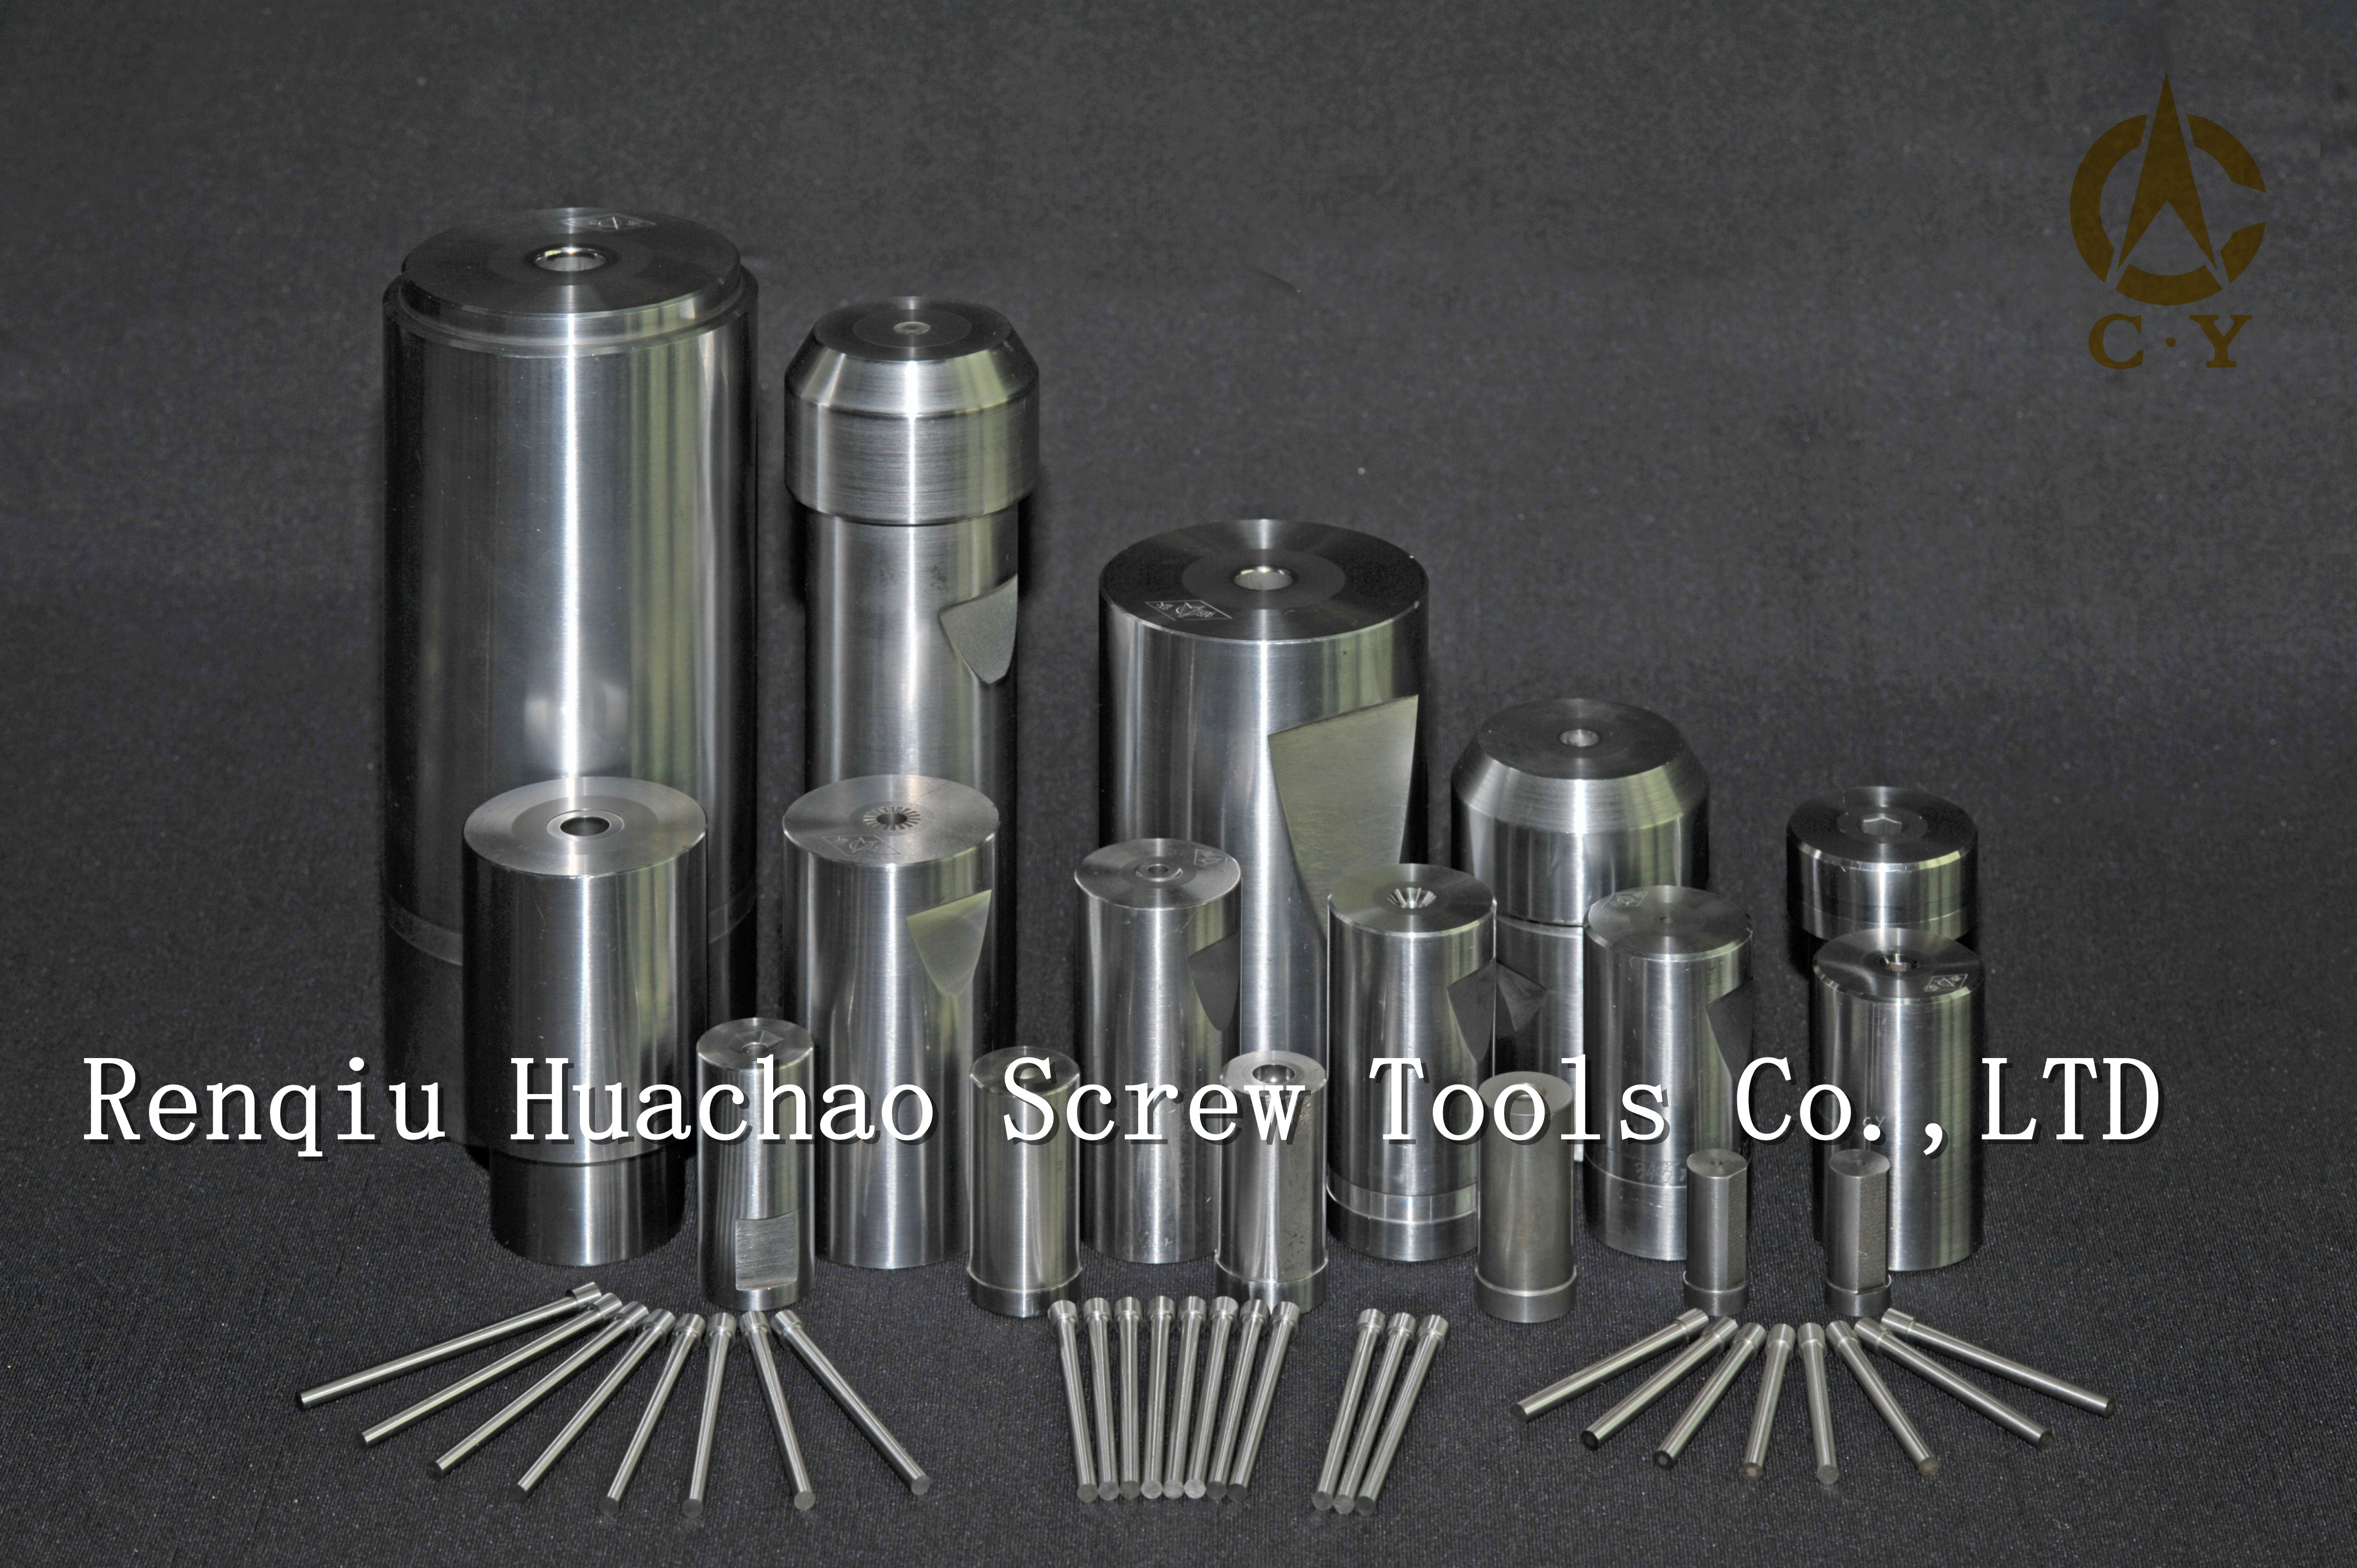 Cold heading die carbide heading die manufacturer in China 